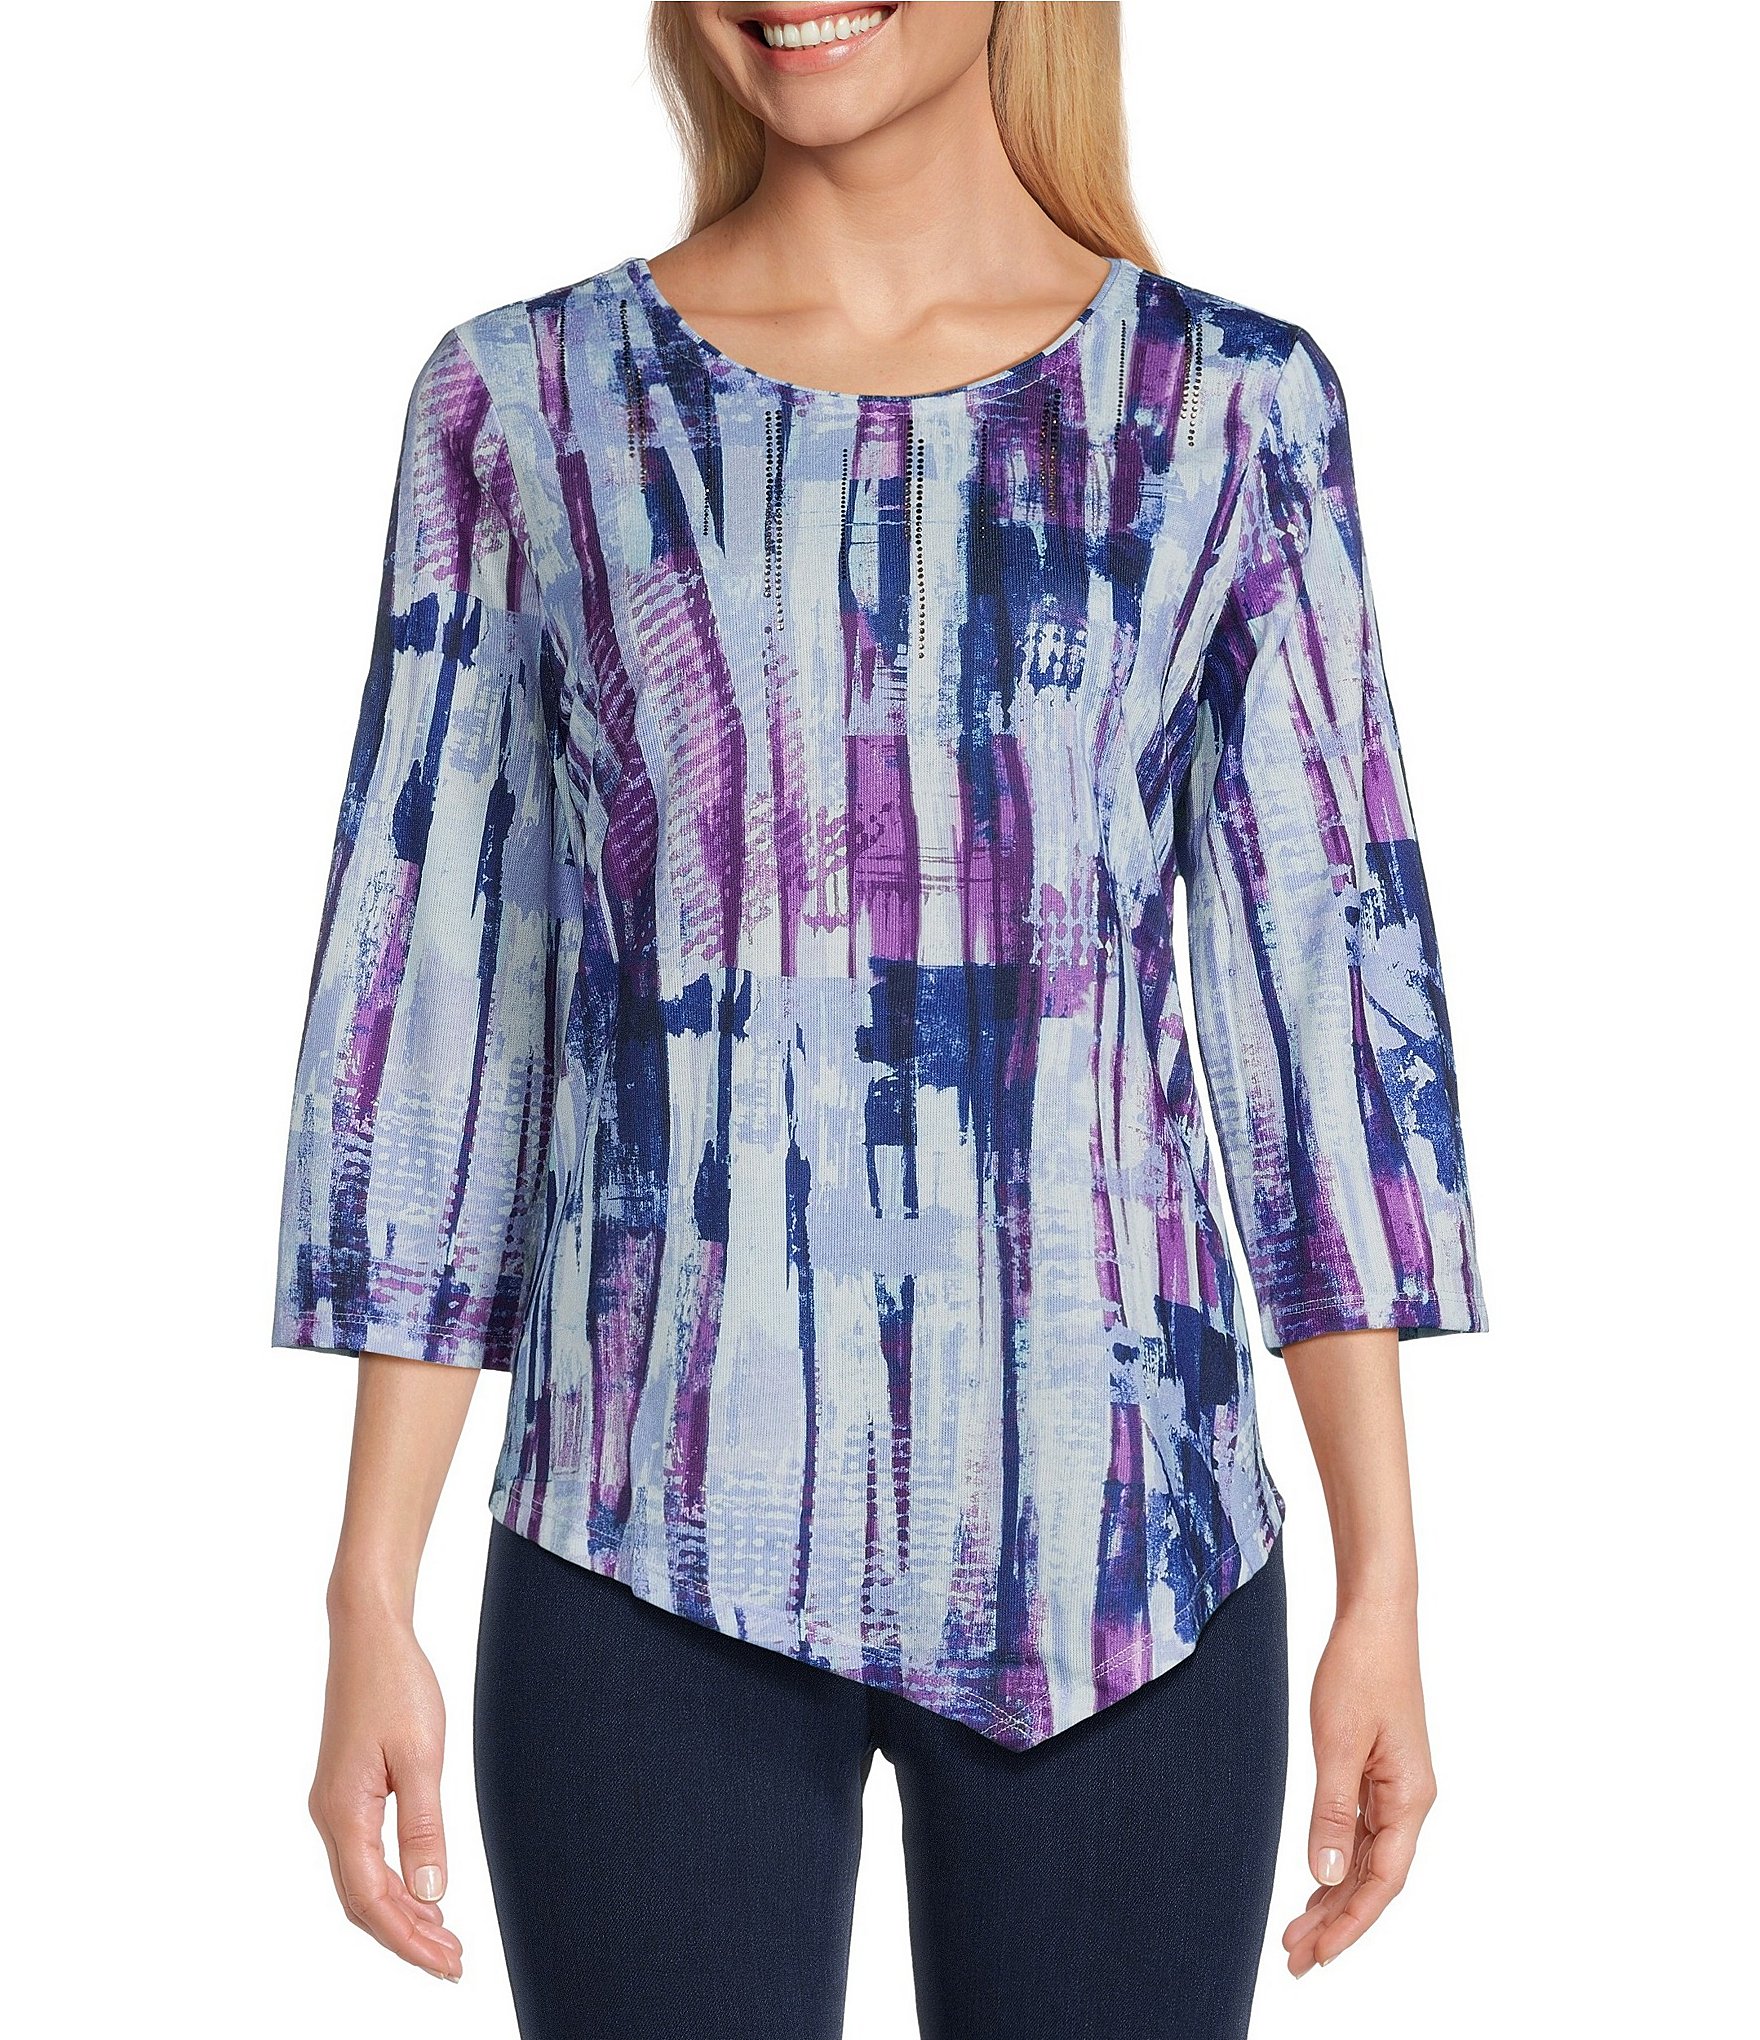 Allison Daley Petite Size Abstract Print 3/4 Sleeve Crew Neck ...